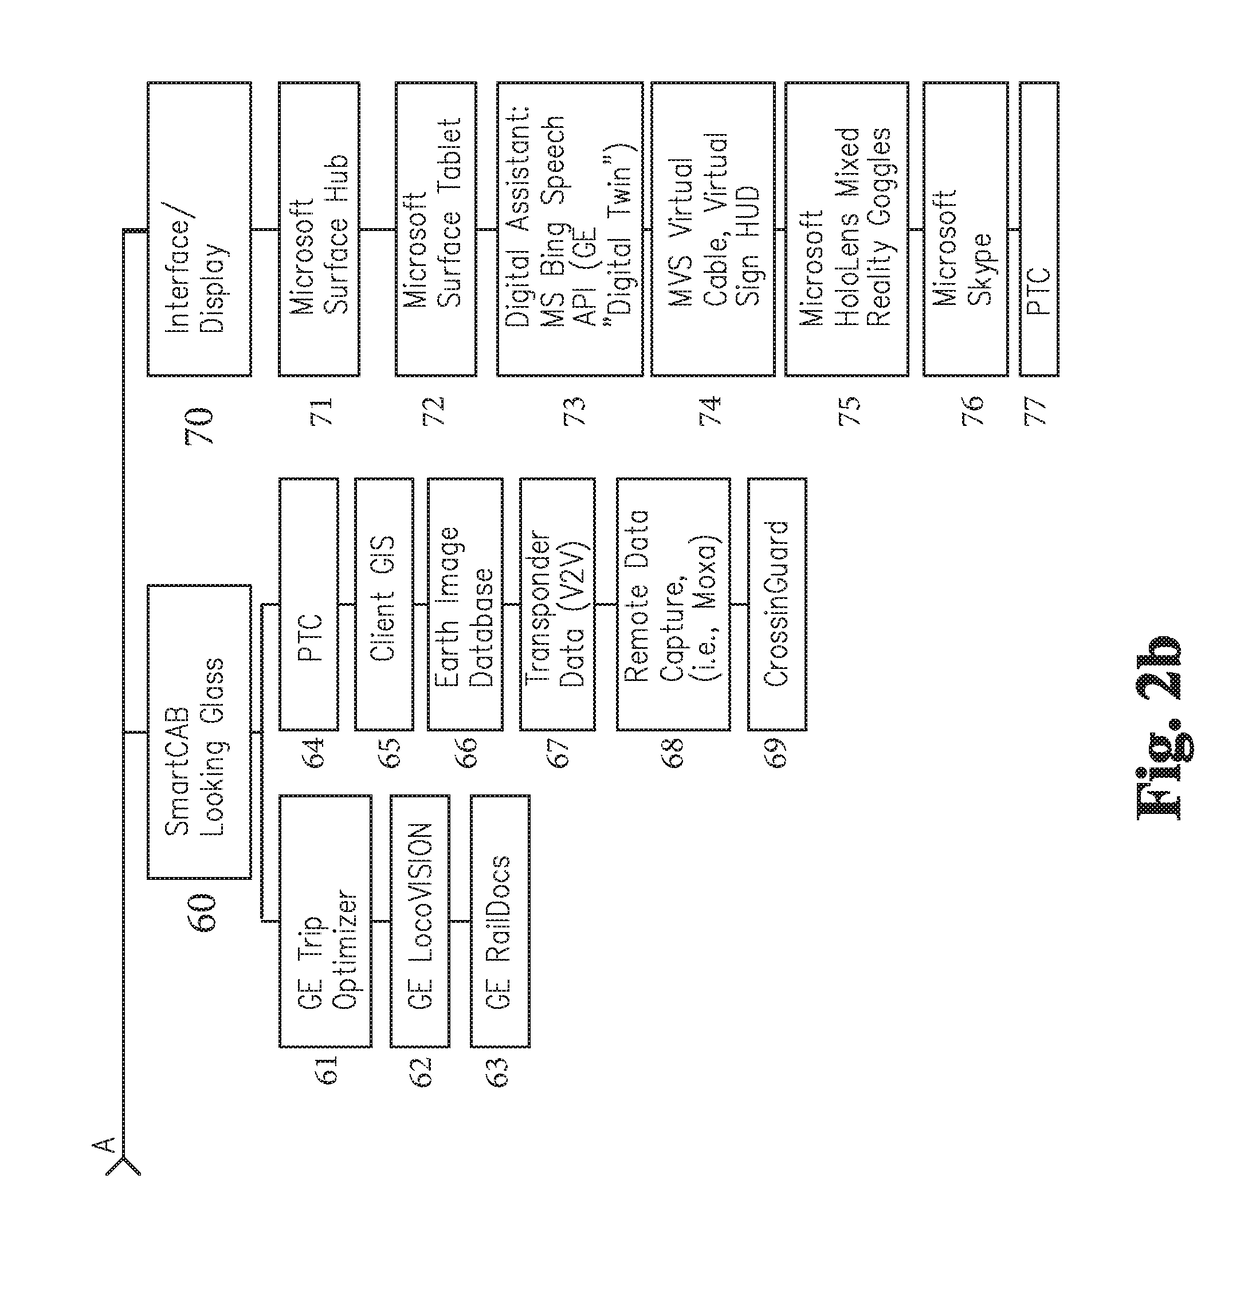 Locomotive decision support architecture and control system interface aggregating multiple disparate datasets